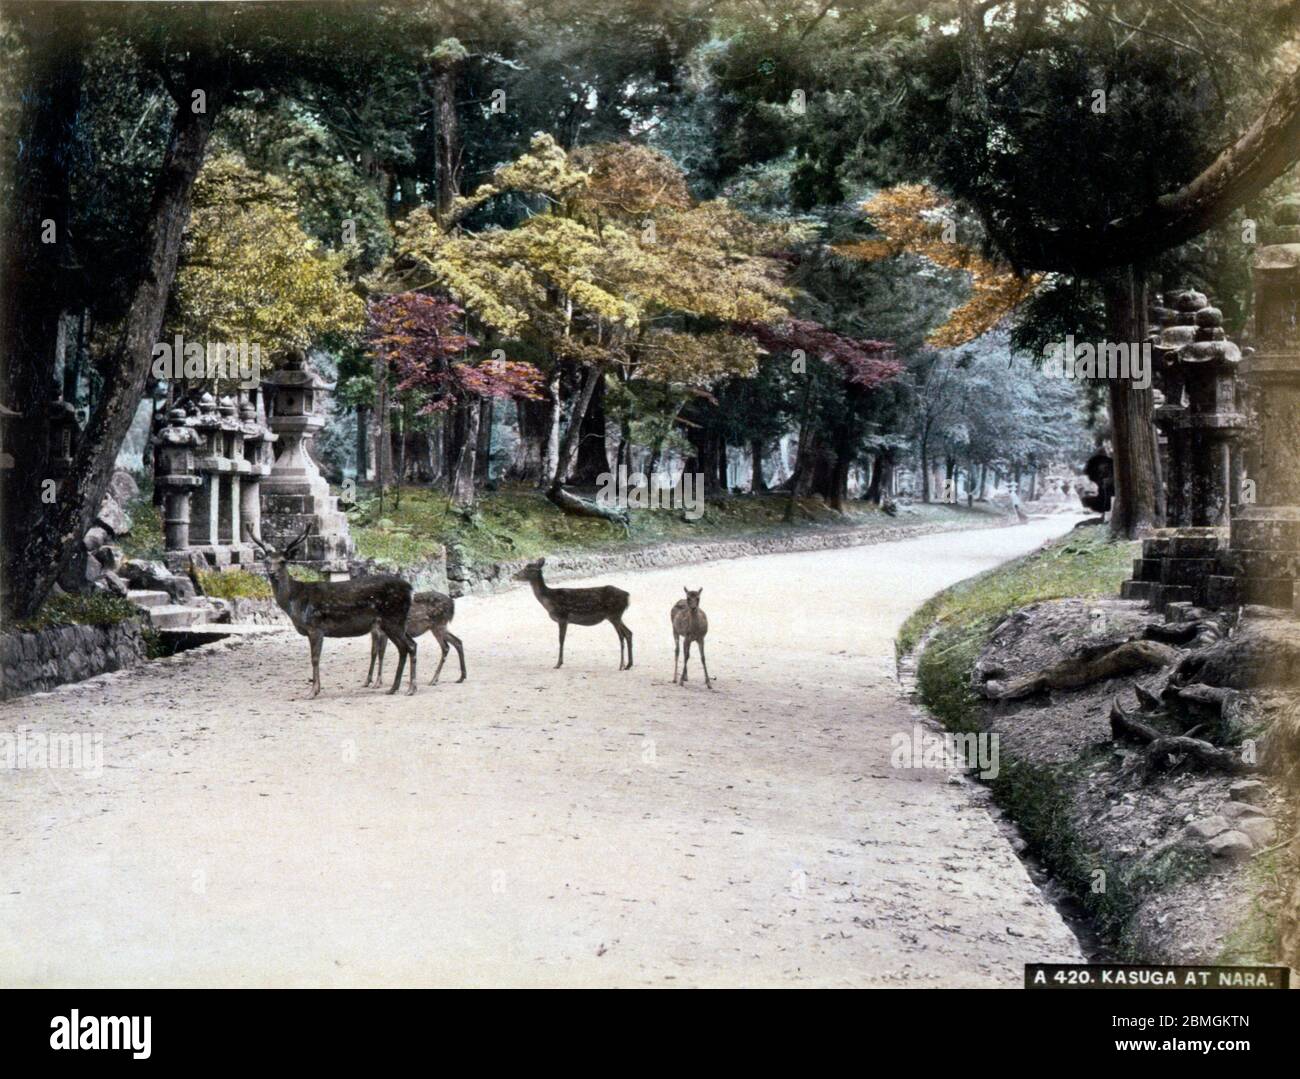 [ 1880s Japan - Sacred Deer at Nara Park ] —   Sacred Shika deer on the road to Kasuga Taisha (春日大社, Kasuga Grand Shrine) in Nara Park, Nara.  The park was established in 1880 (Meiji 13). Until 1637, killing a sacred deer was a capital offense punishable by death.   After the end of WWII, the divine status of the deer was officially removed, but they are still seen as sacred locally and they’re legally protected from hunting.  19th century vintage albumen photograph. Stock Photo